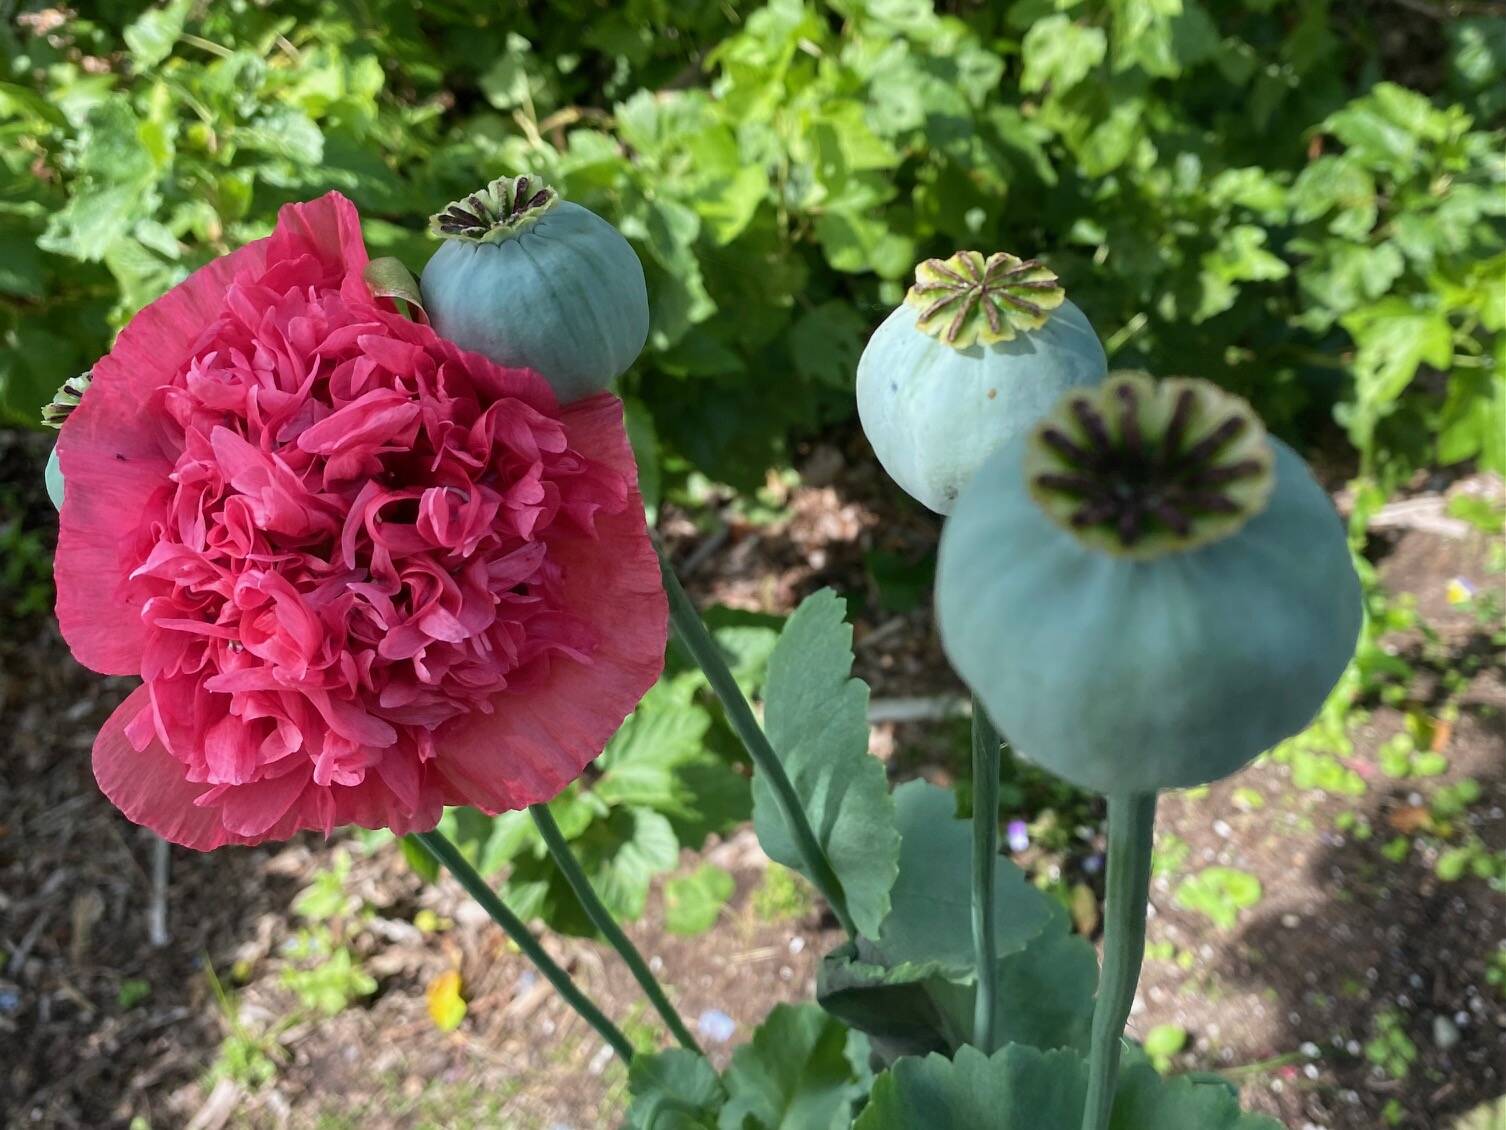 A poppy in full bloom next to seed pods at the Arboretum. 8-5-23. (Photo by Denise Carroll)